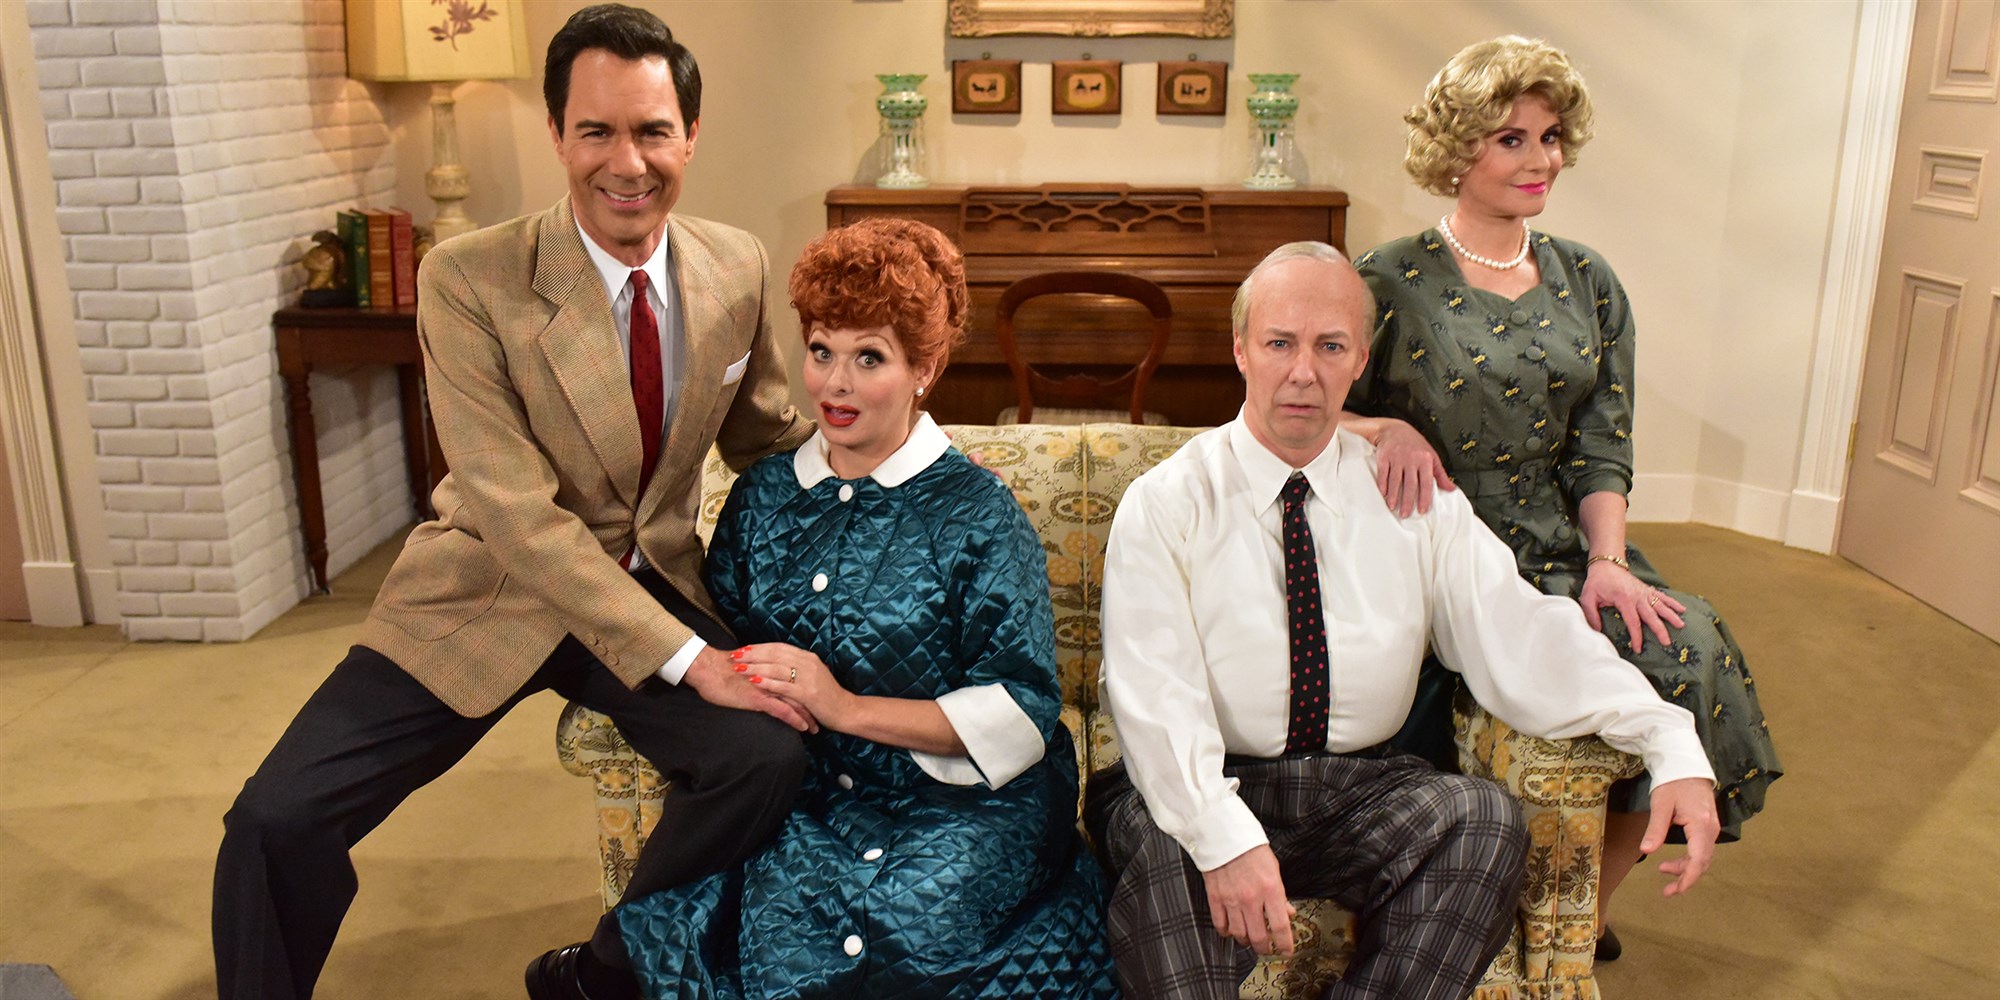 will and grace cast as i love lucy characters 